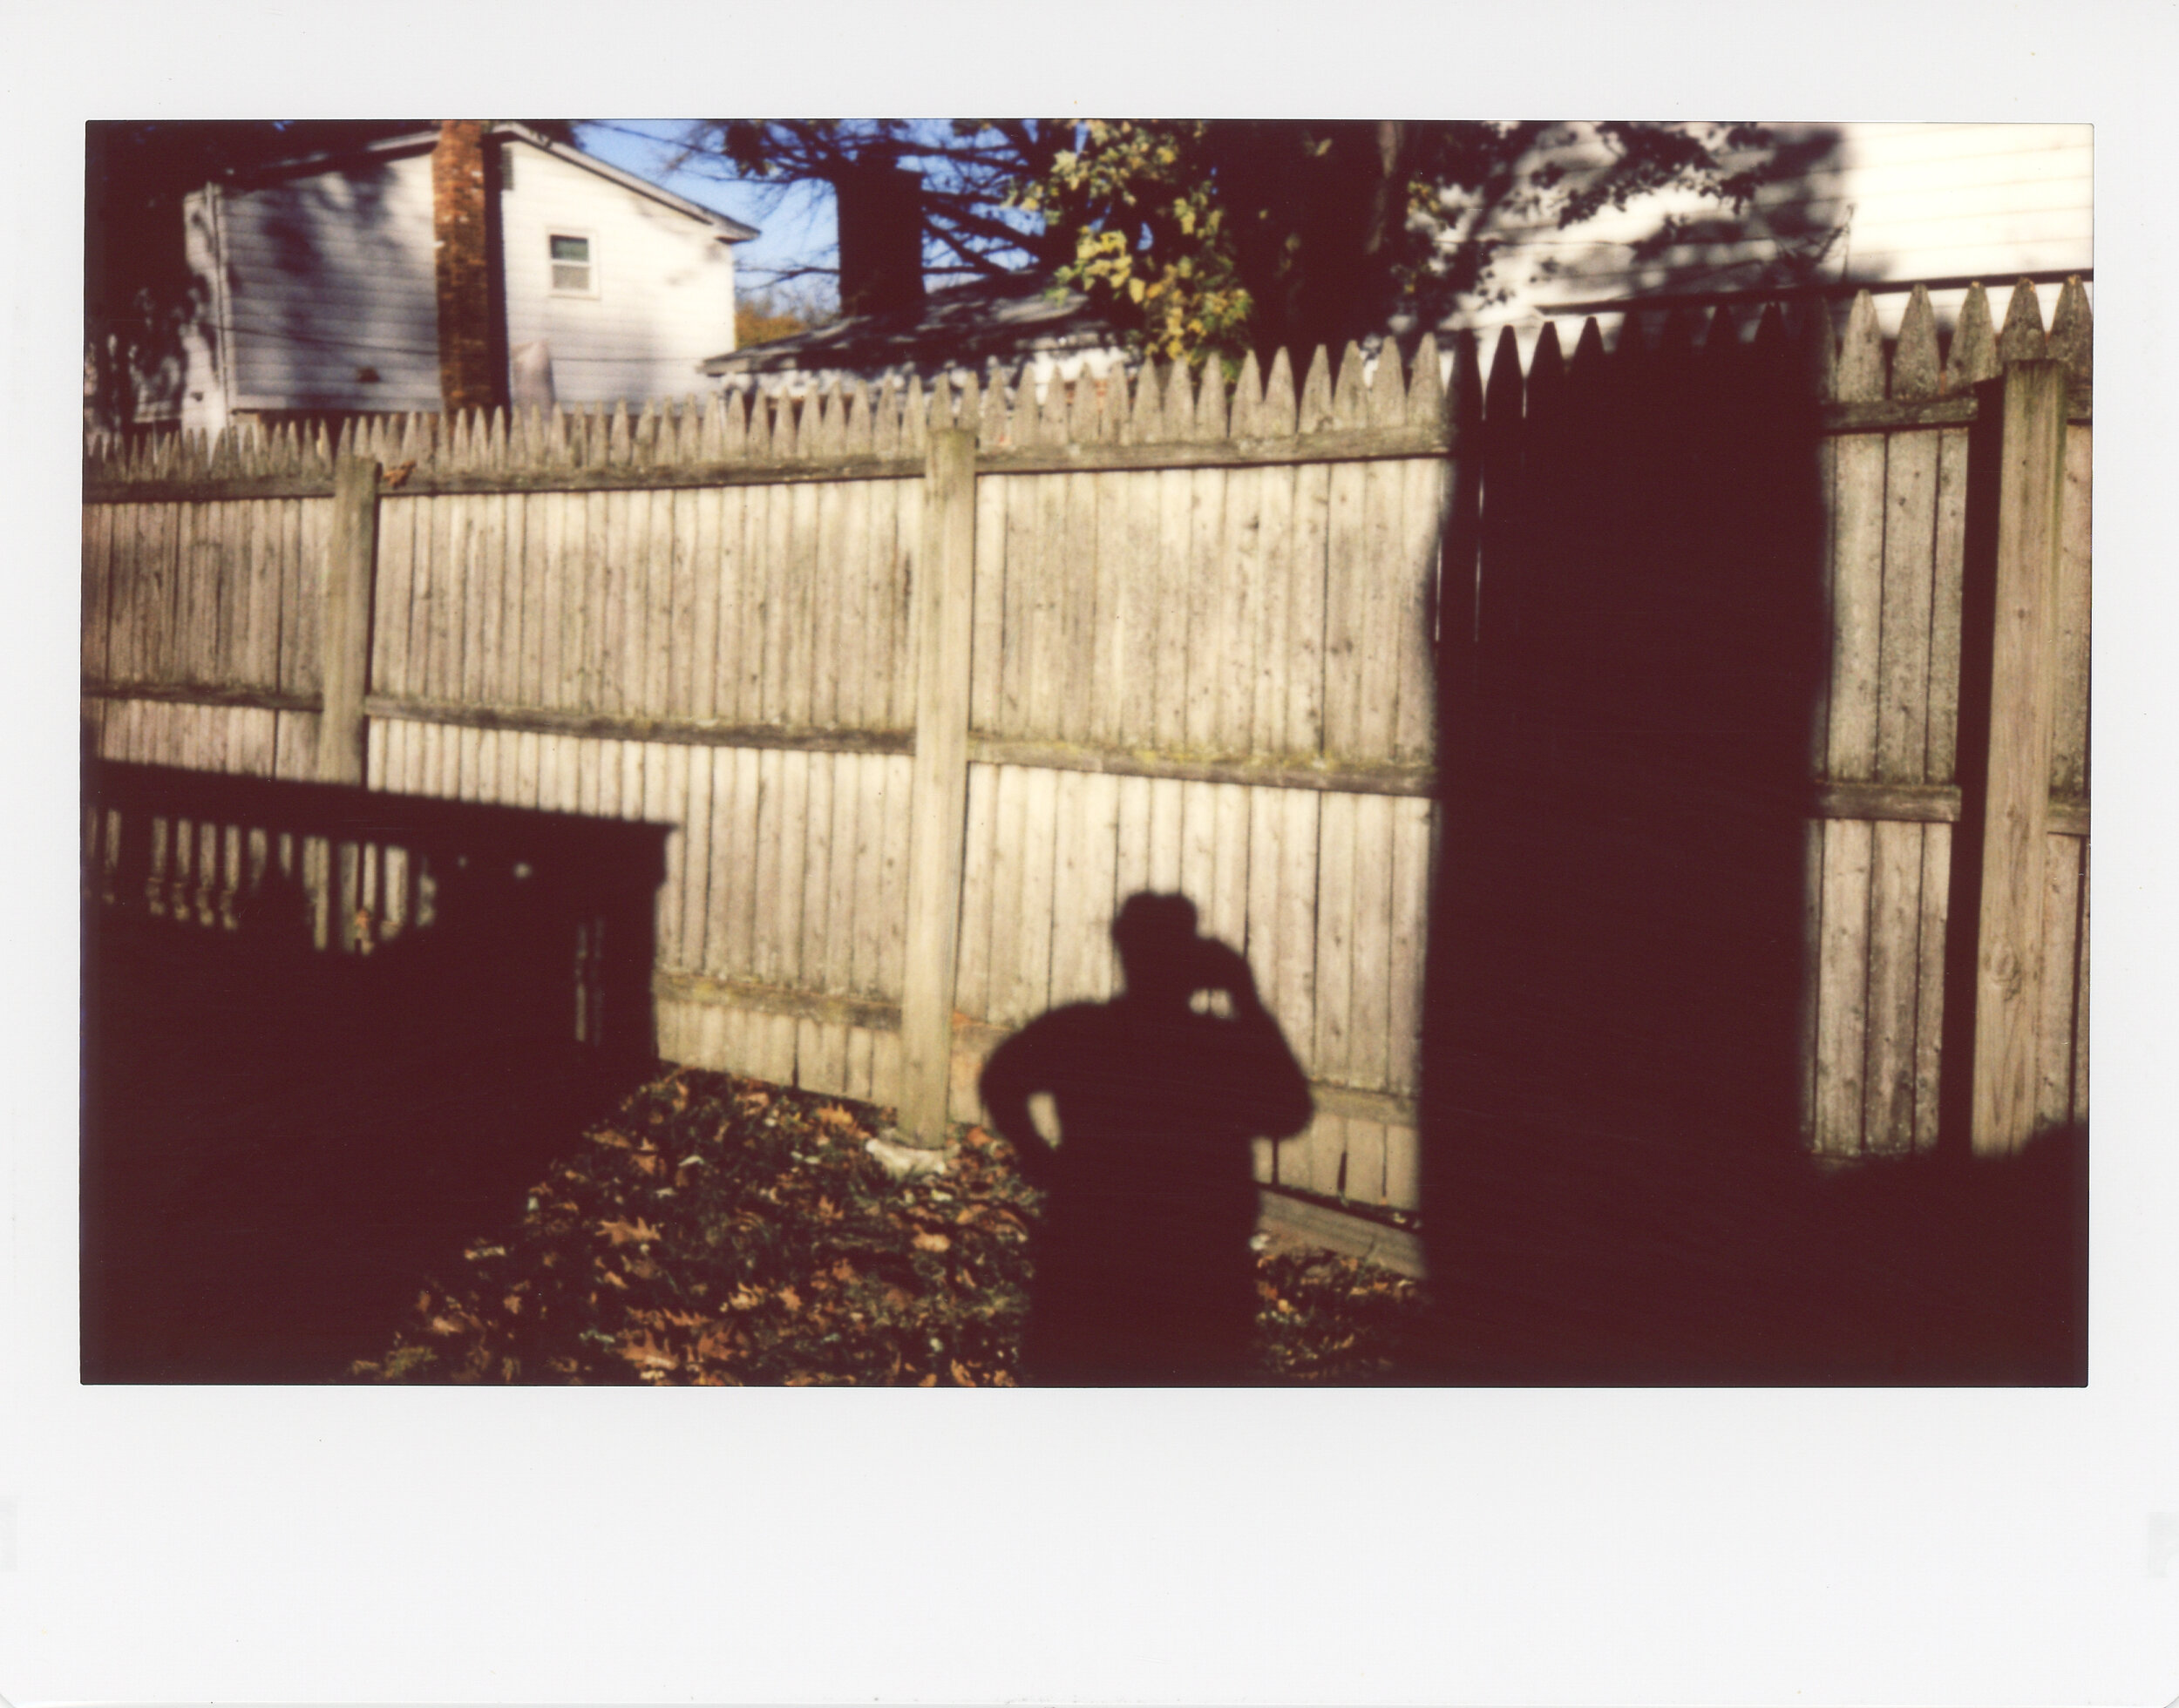   This self-portrait of my shadow was taken in my backyard the day after the Election. I really wanted to be outside and feel the sun while experimenting with my instant film camera. With so much uncertainty in the air at the time, I wanted to feel s